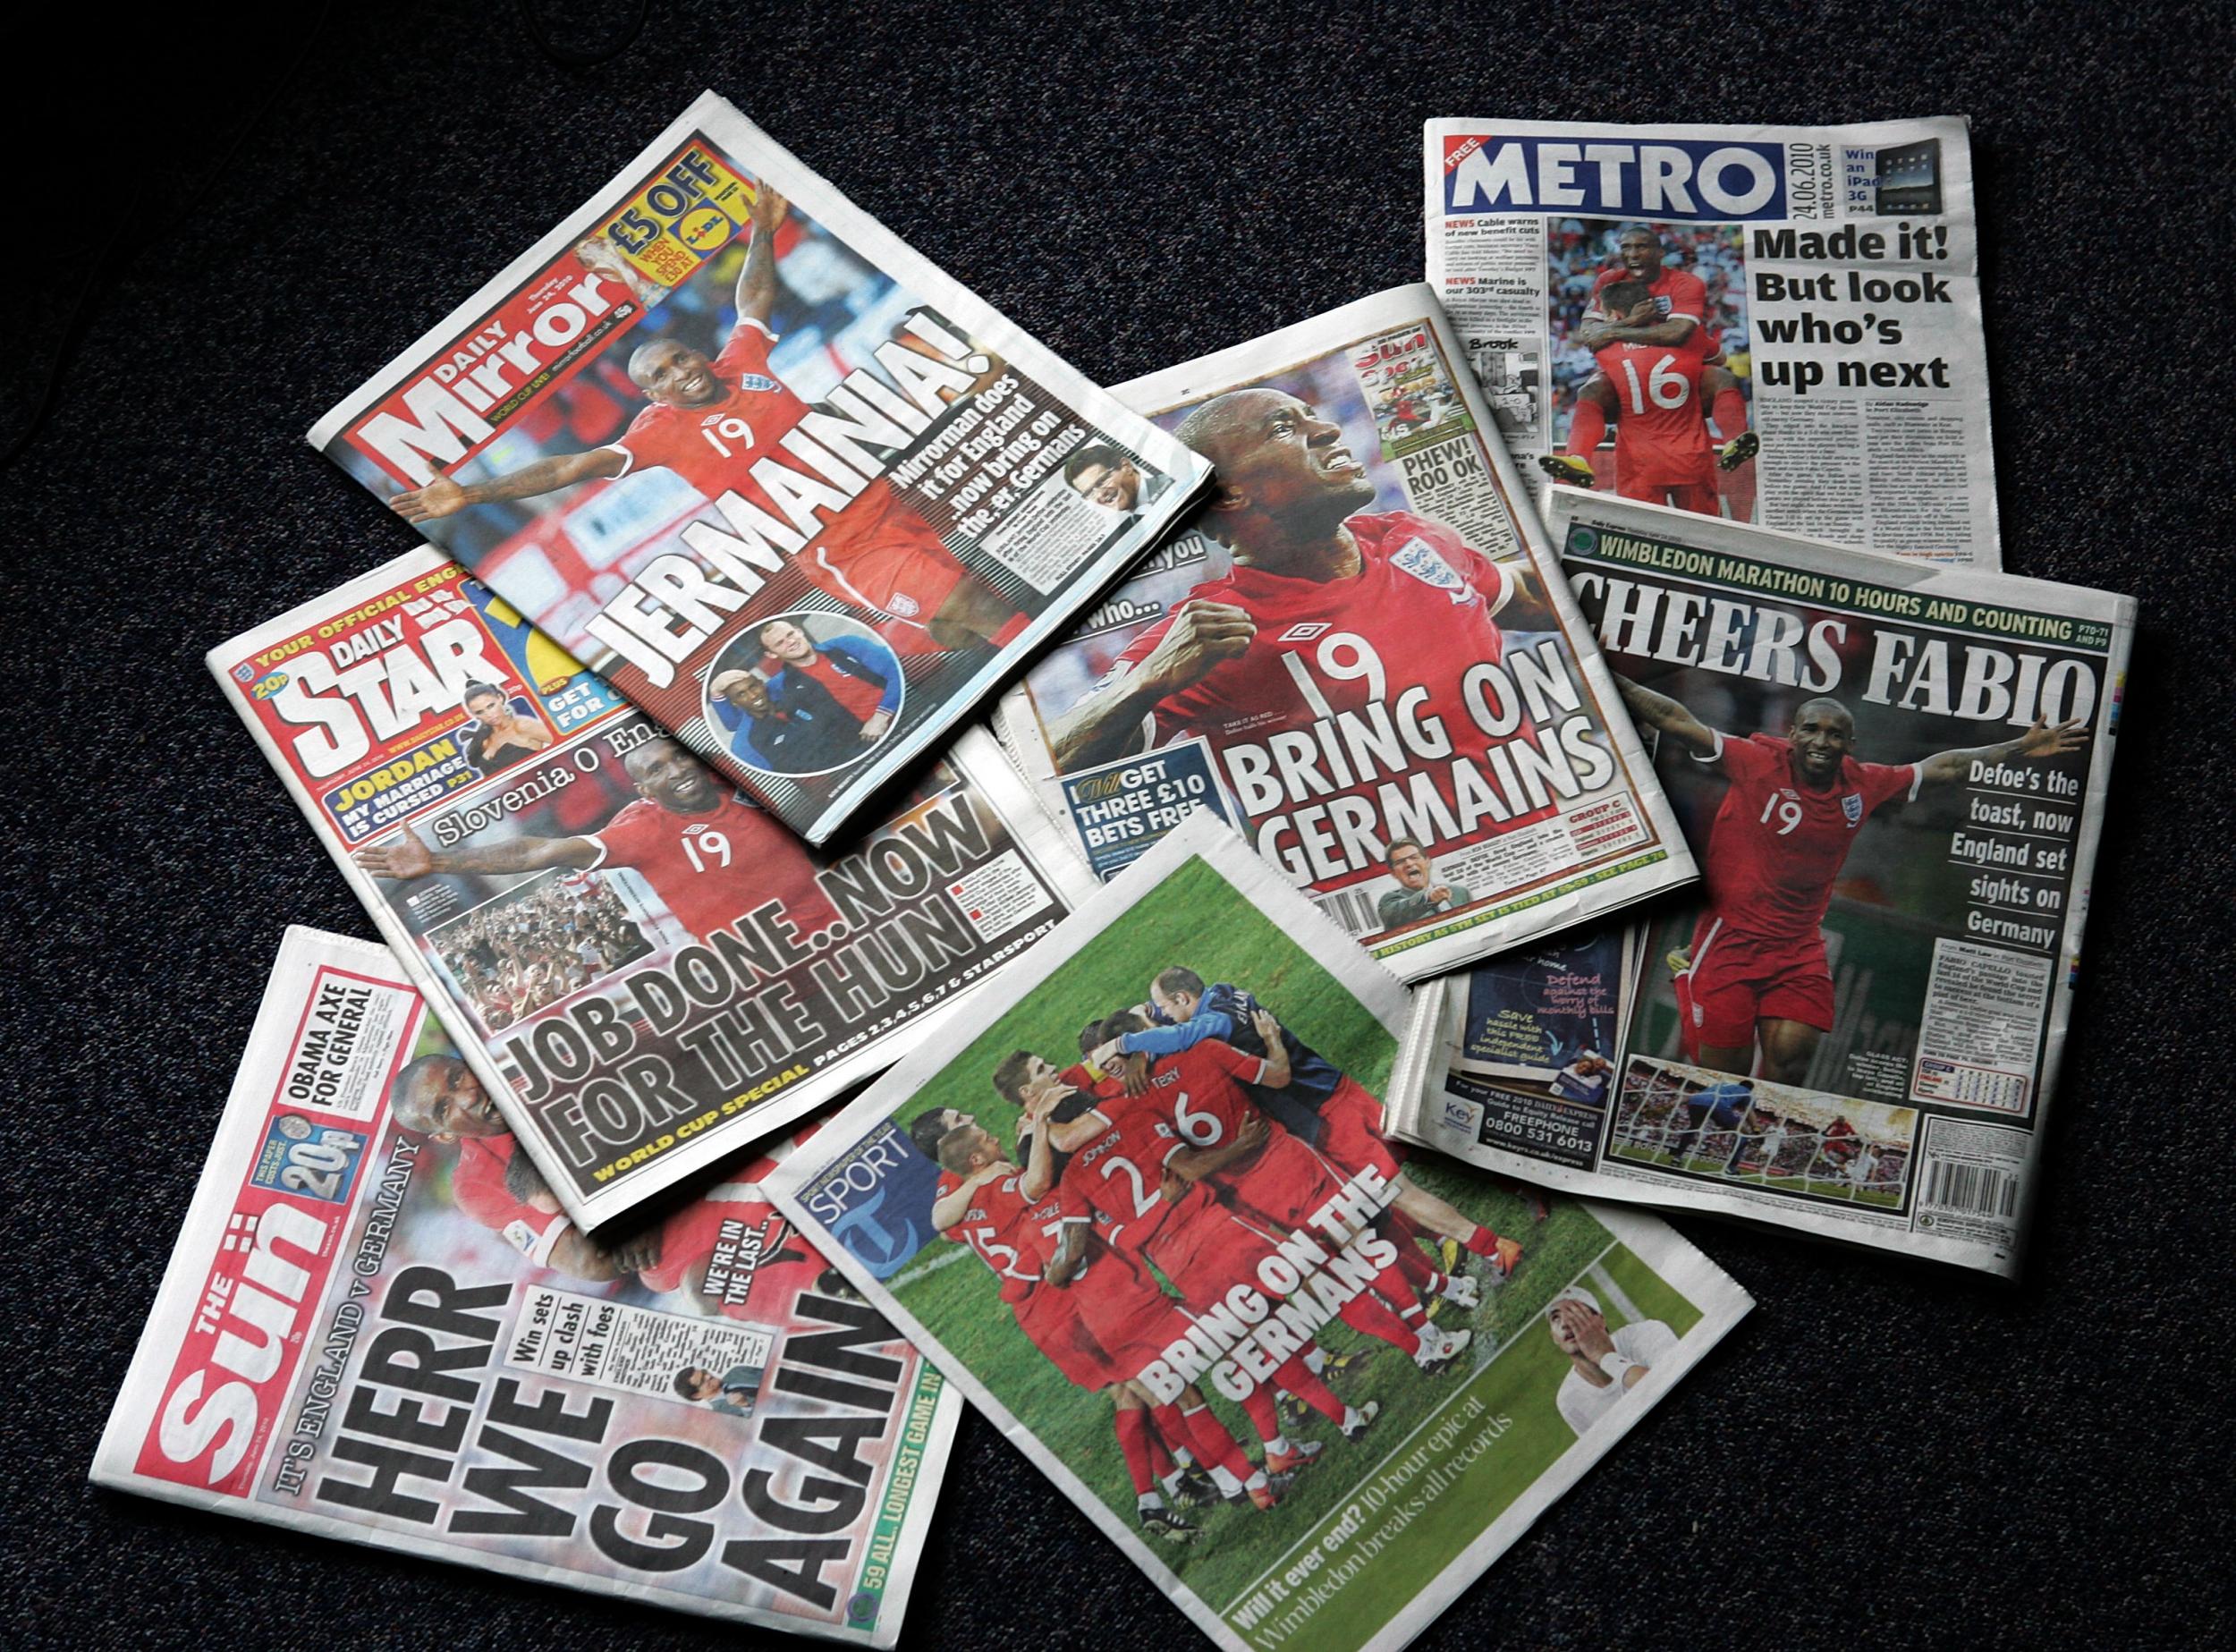 How far should the press go in their support of the national teams?